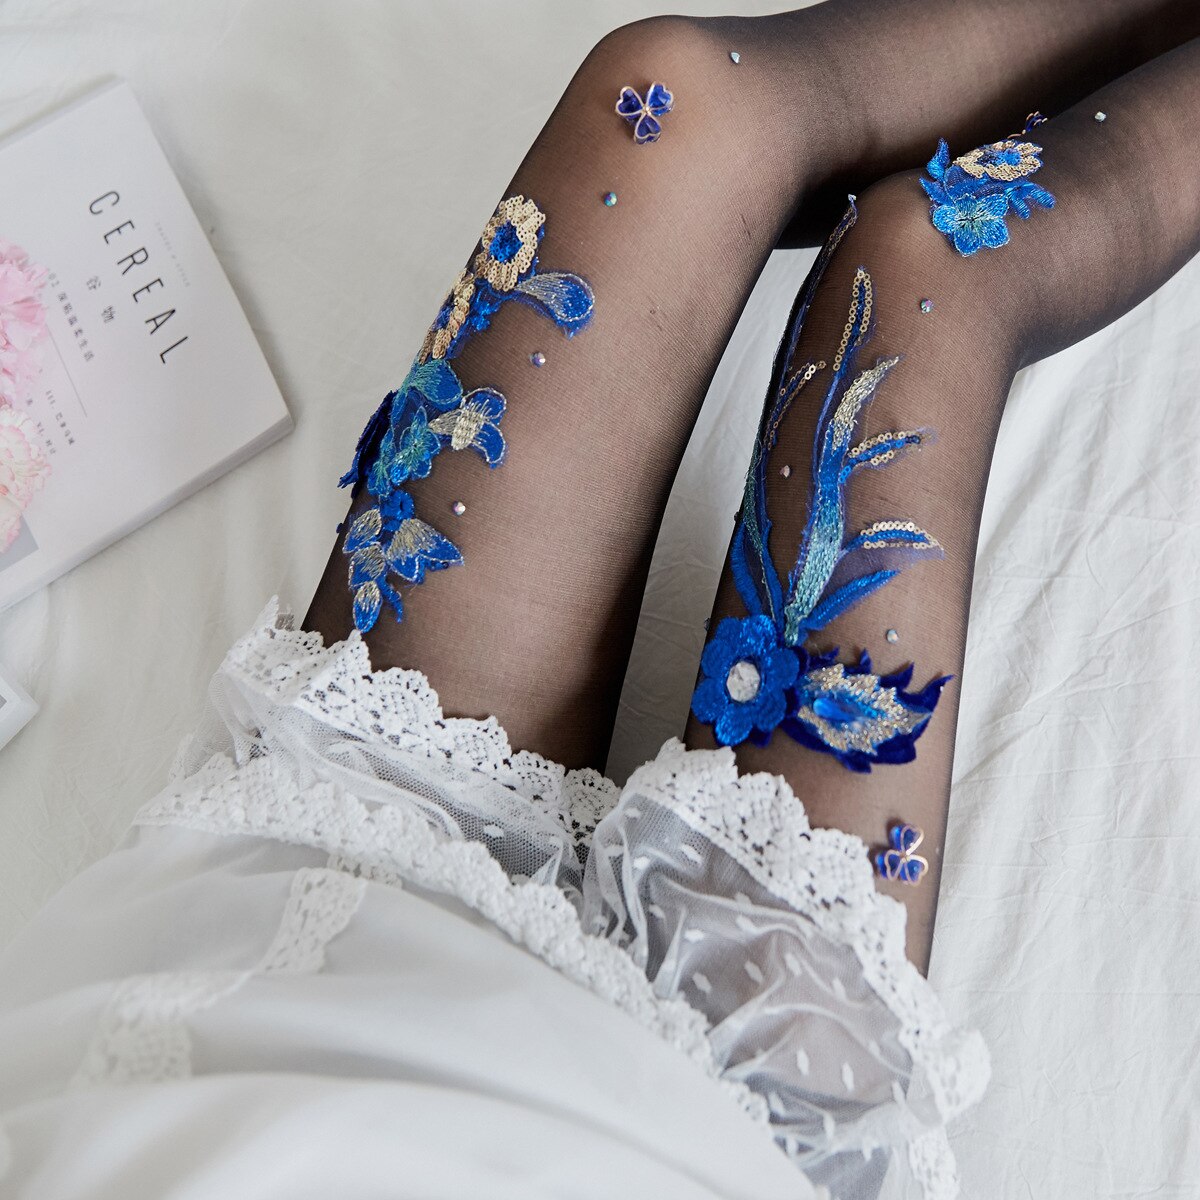 Handmade Embroidered Flower Tights